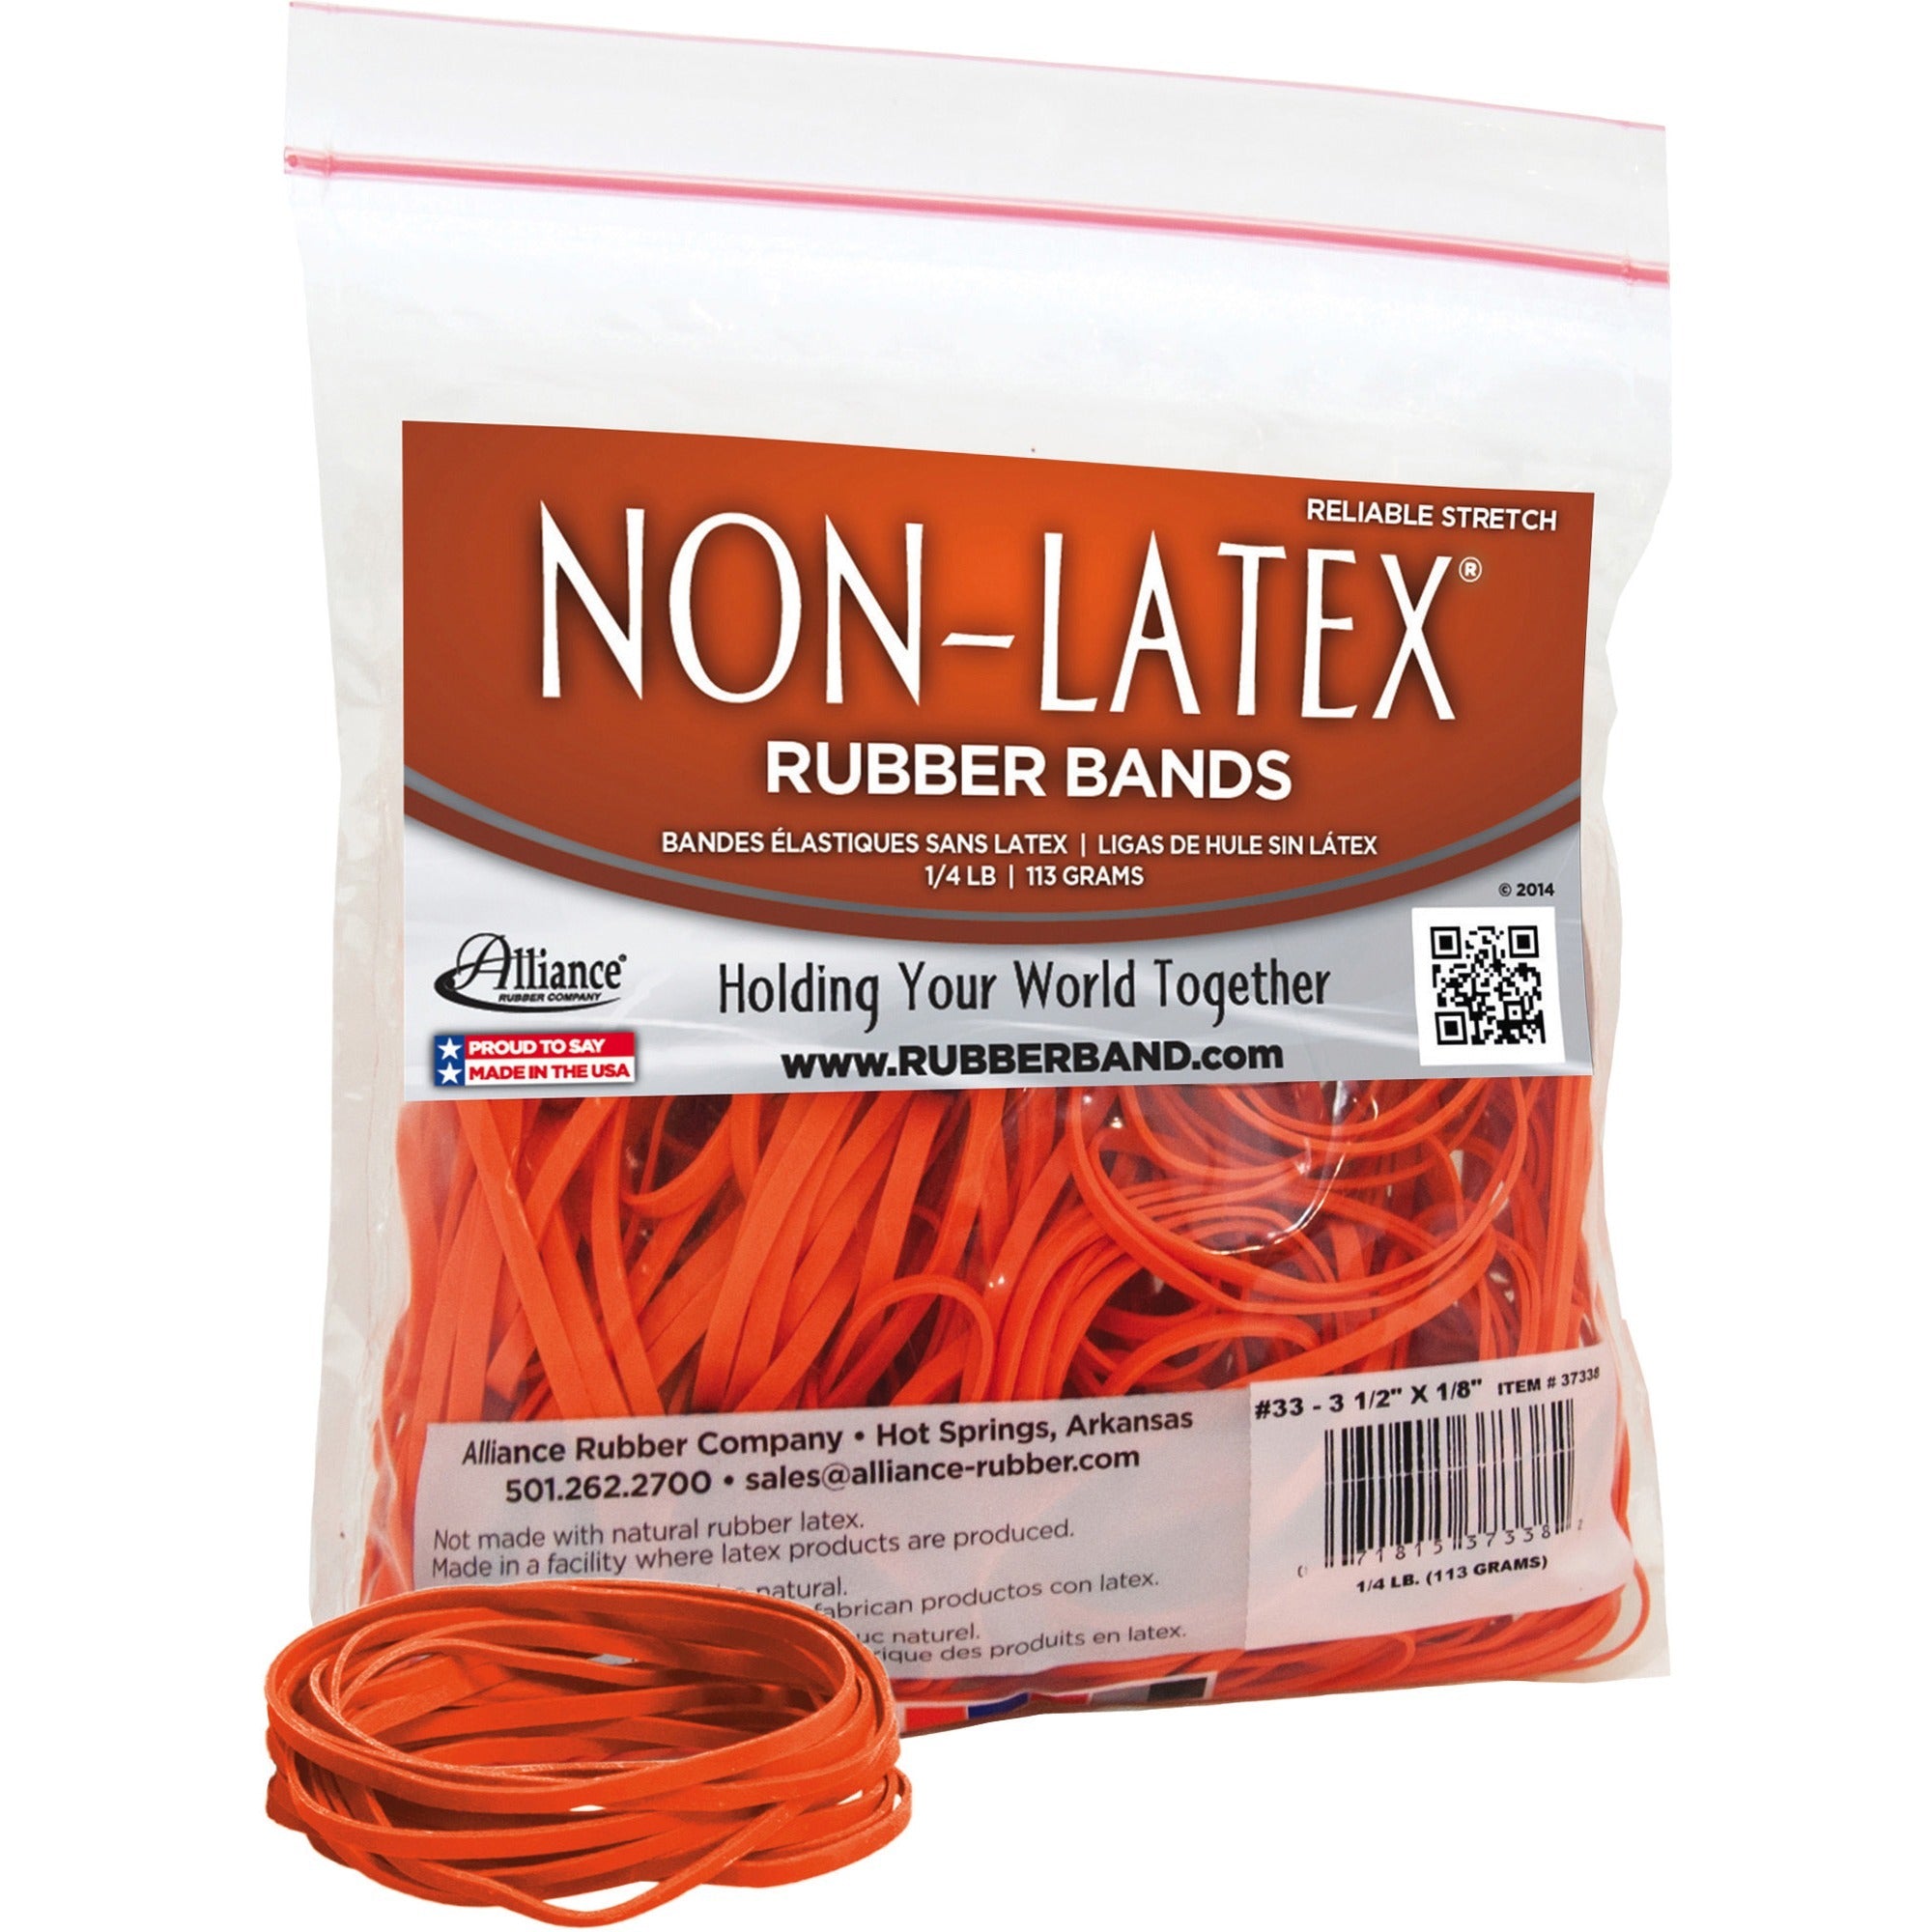 Alliance Rubber 37338 Non-Latex Rubber Bands - Size #33 - 1/4 lb. poly bag contains approx. 180 bands - 3 1/2" x 1/8" - Orange - 